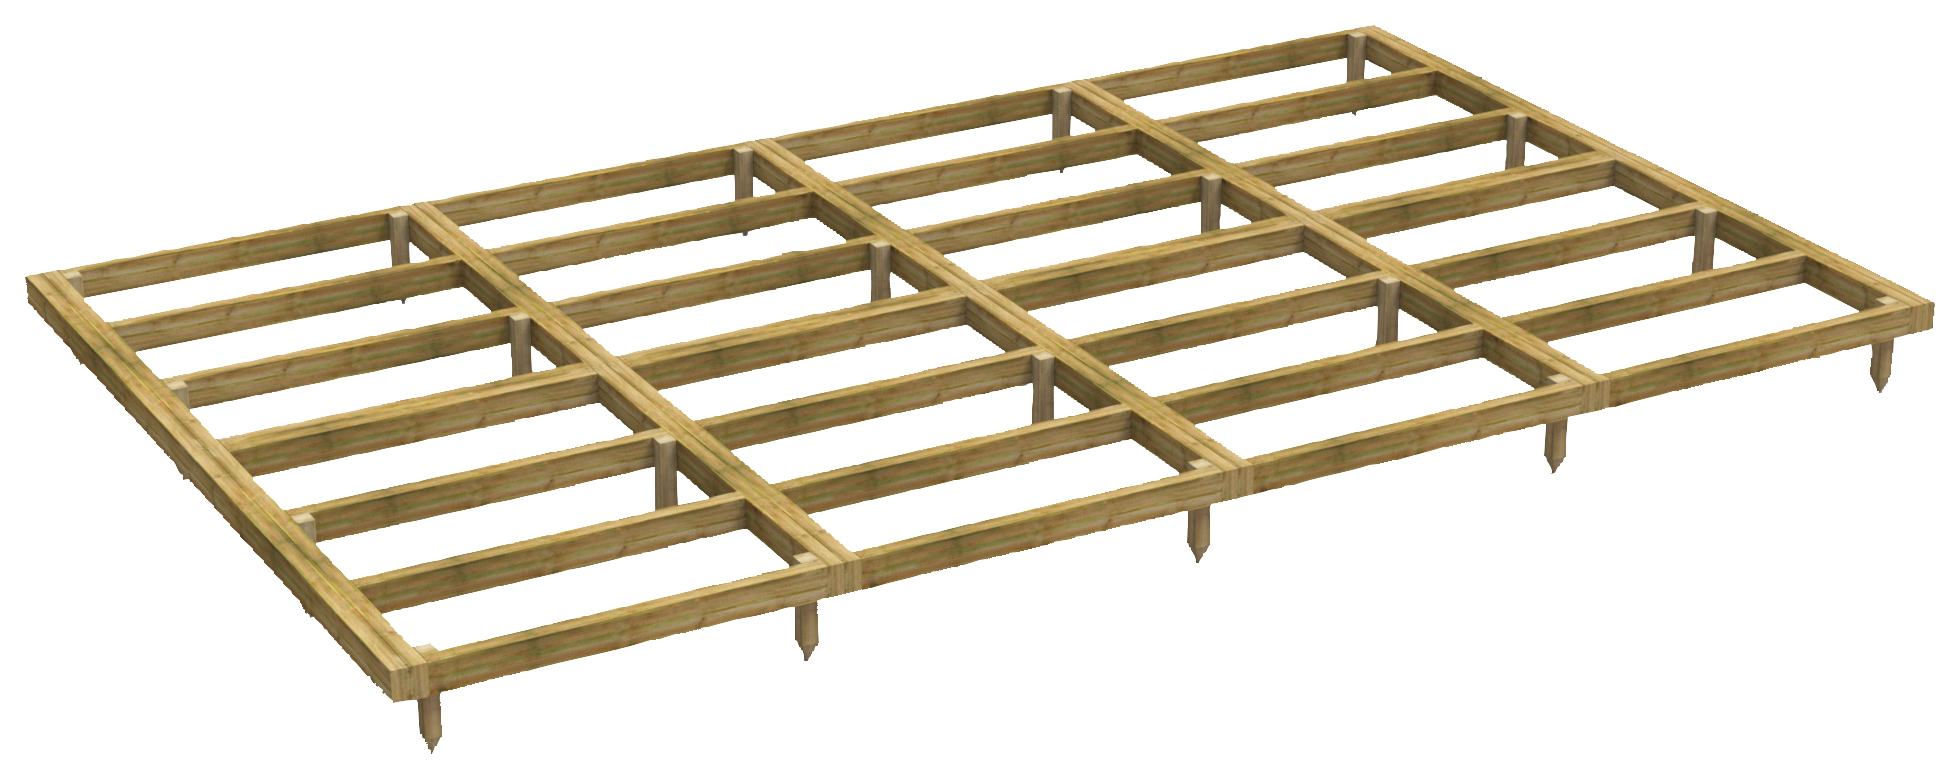 Image of Power Sheds 16 x 10ft Pressure Treated Garden Building Base Kit